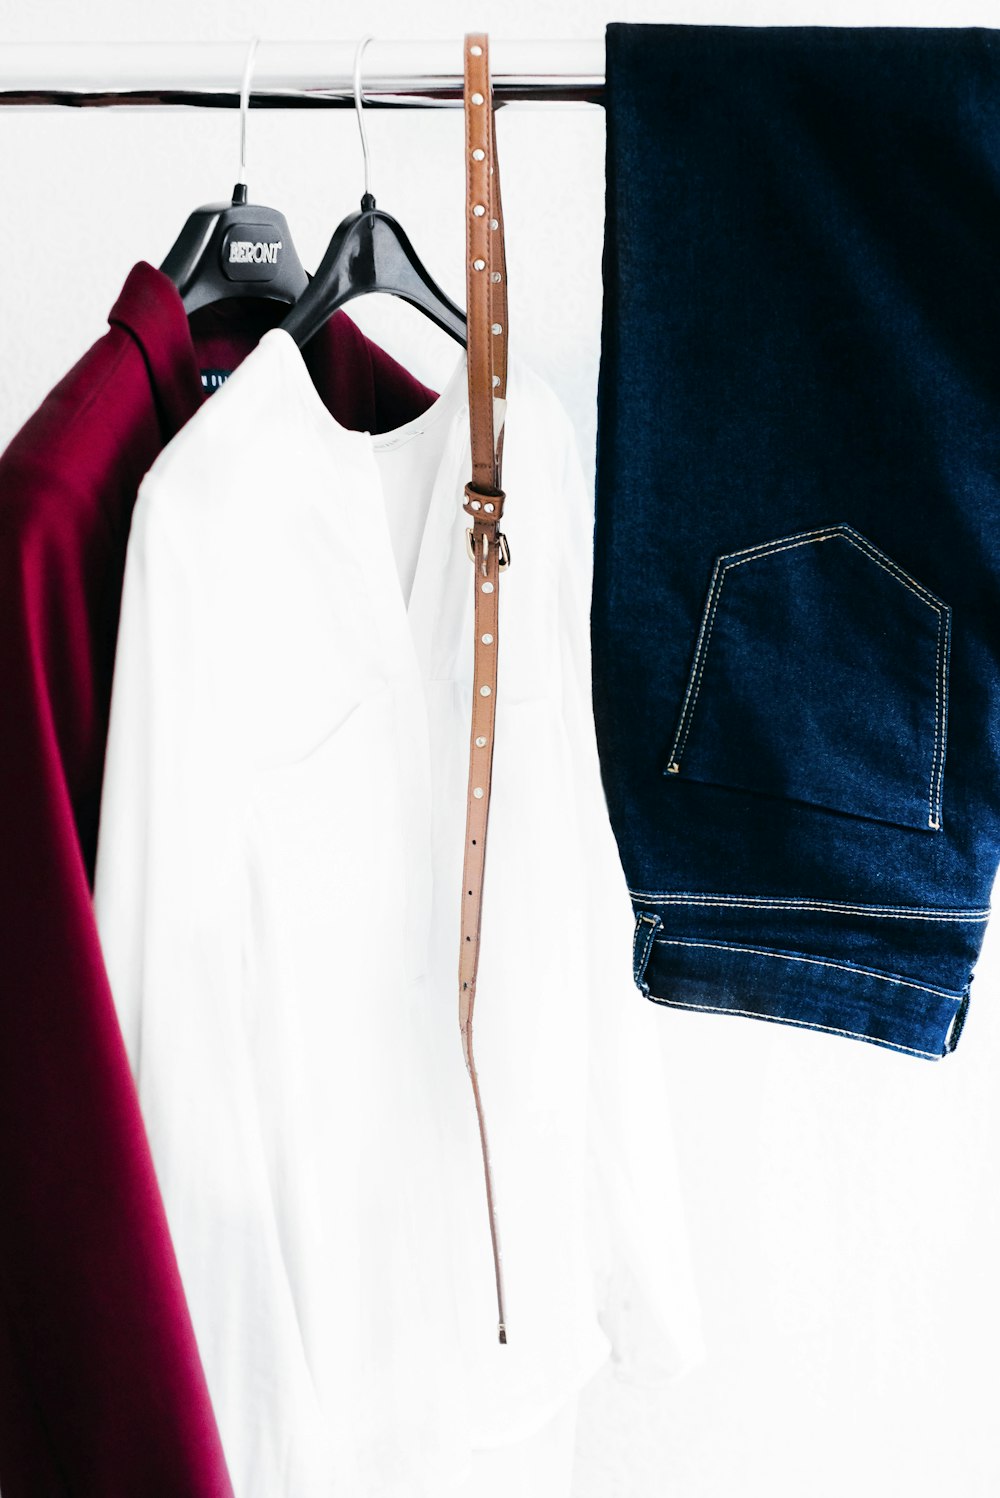 two white and red long-sleeved shirt with belt and jeans